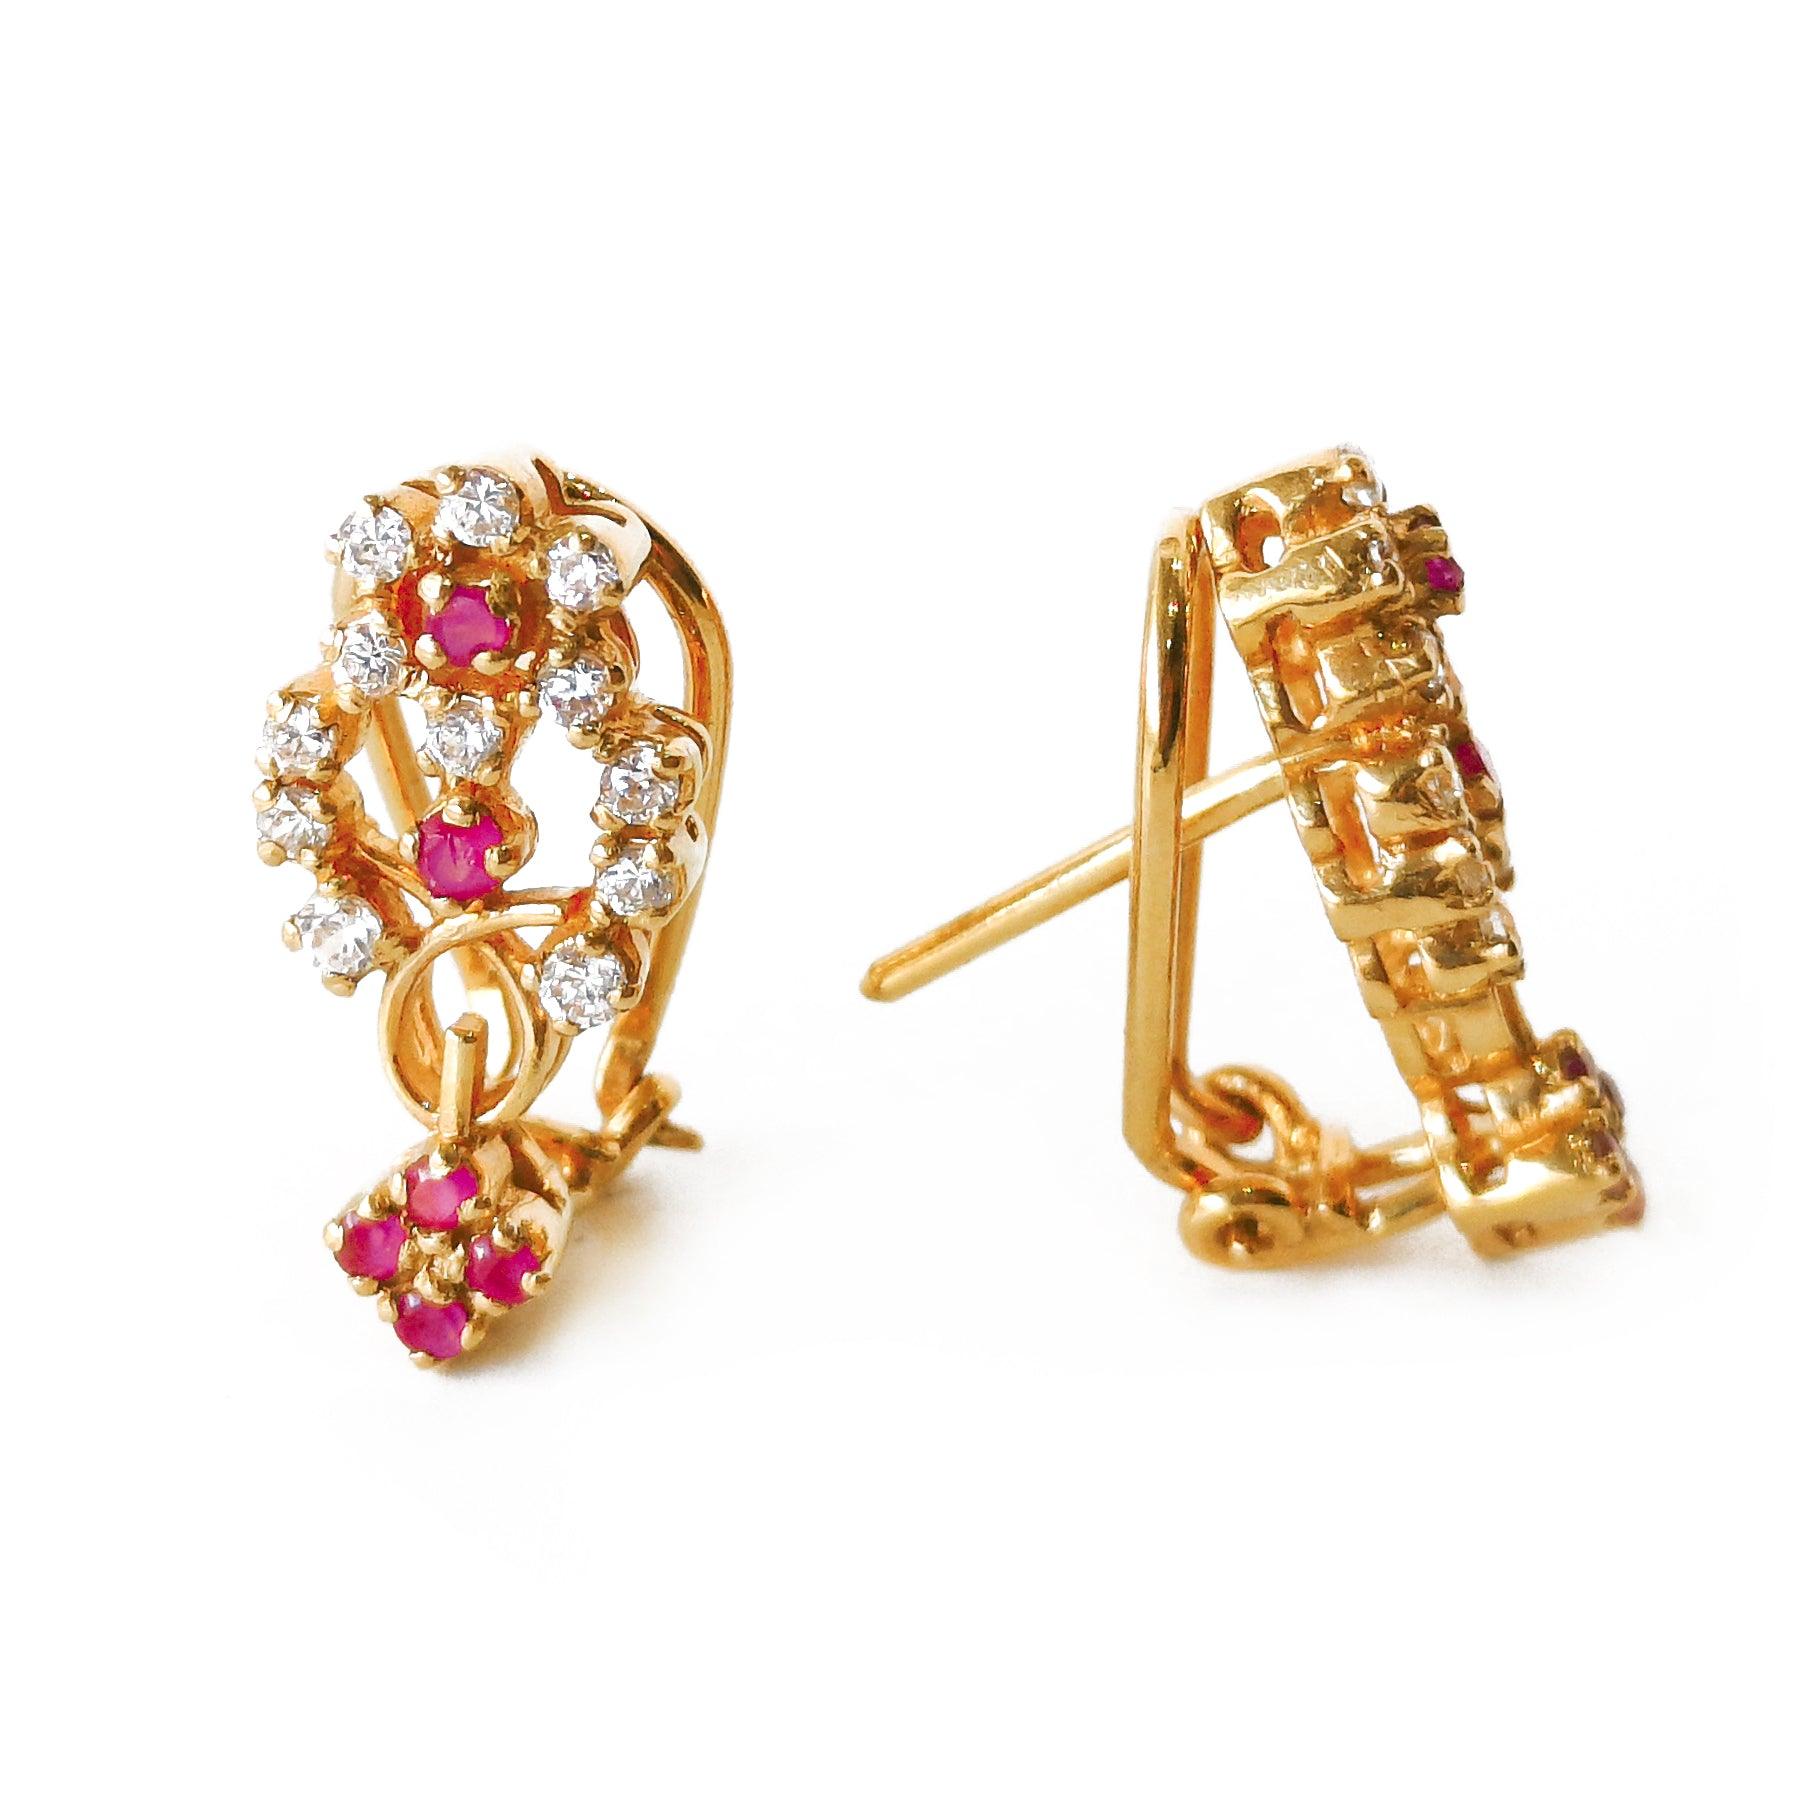 22ct Gold Stud Earrings set with Cubic Zirconias and Coloured Stones (8.6g) E-3375 - Minar Jewellers